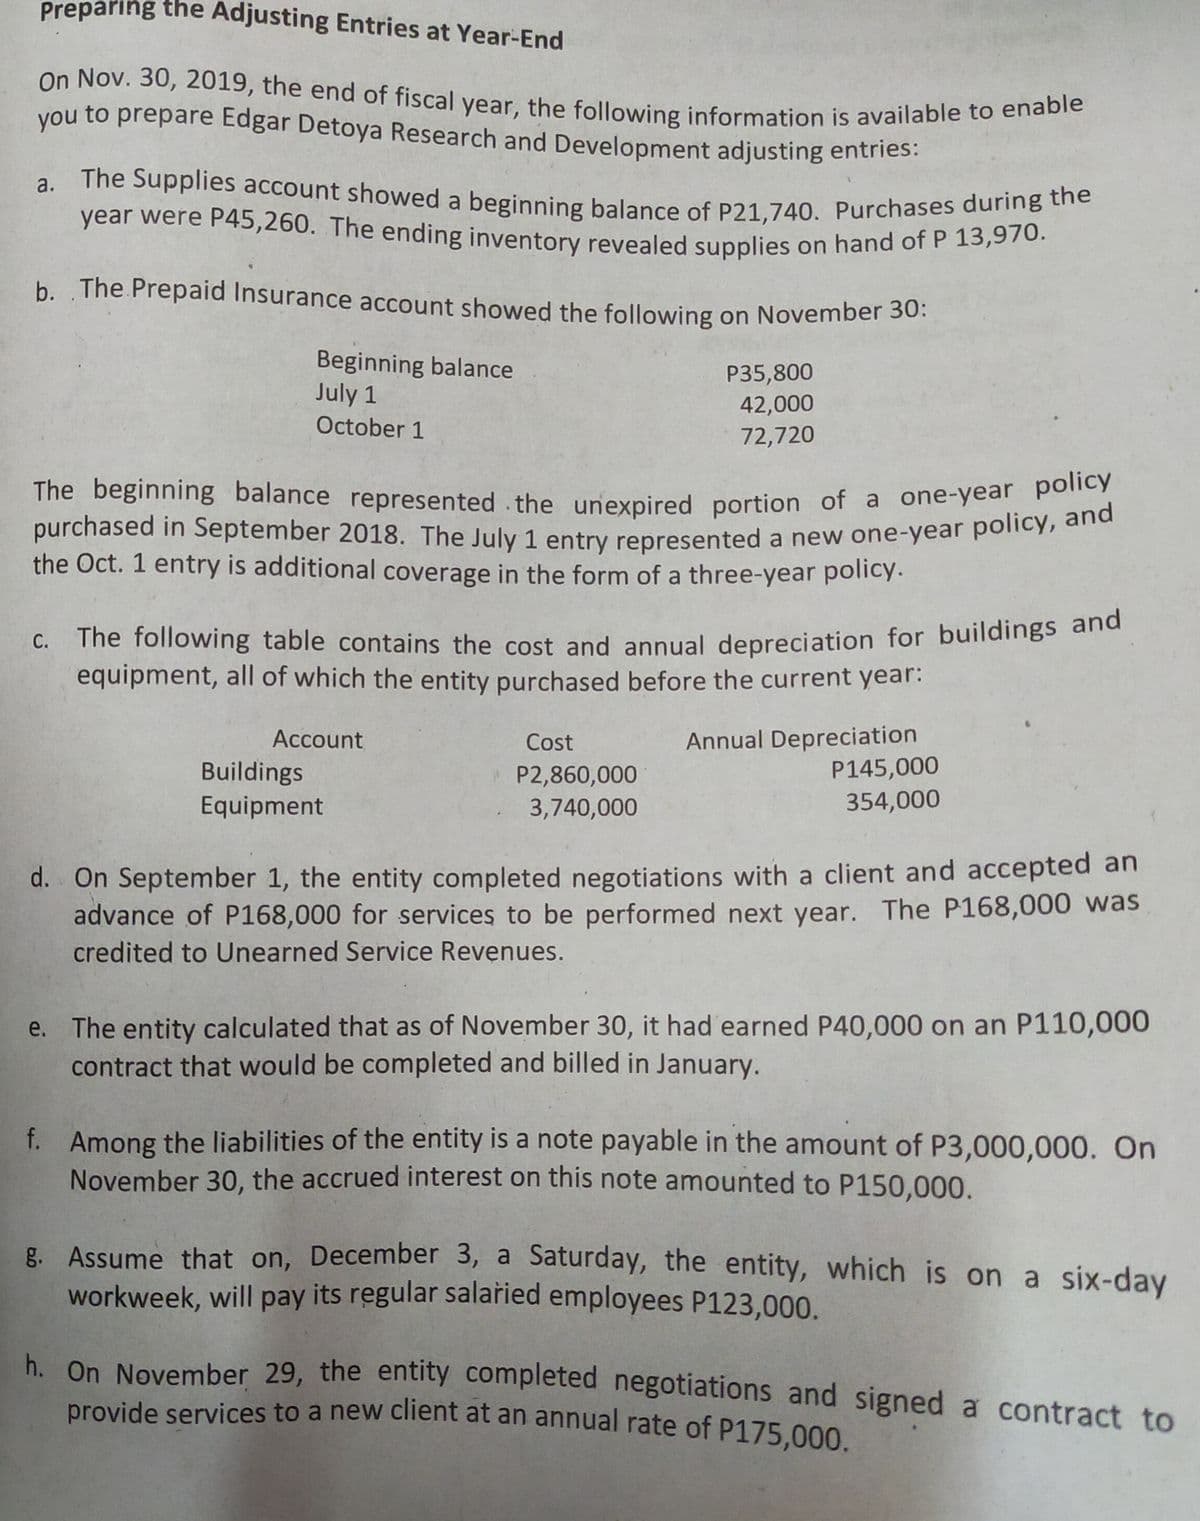 The beginning balance represented the unexpired portion of a one-year policy
On Nov. 30, 2019, the end of fiscal year, the following information is available to enable
year were P45,260. The ending inventory revealed supplies on hand of P 13,970.
Preparing the Adjusting Entries at Year-End
a. The Supplies account showed a beginning balance of P21,740. Purchases during the
you
you to prepare Edgar Detoya Research and Development adjusting entries:
b. The Prepaid Insurance account showed the following on November 30.
Beginning balance
July 1
P35,800
42,000
October 1
72,720
The beginning balance represented the unexpired portion of a one-yeal pand
purchased in September 2018. The July 1 entry represented a new one-year policy, eme
the Oct. 1 entry is additional coverage in the form of a three-year policy.
c. The following table contains the cost and annual depreciation for buildings ana
equipment, all of which the entity purchased before the current year:
Annual Depreciation
P145,000
354,000
Account
Cost
Buildings
Equipment
P2,860,000
3,740,000
d. On September 1, the entity completed negotiations with a client and accepted an
advance of P168,000 for services to be performed next year. The P168,000 was
credited to Unearned Service Revenues.
e. The entity calculated that as of November 30, it had earned P40,000 on an P110,000
contract that would be completed and billed in January.
f. Among the liabilities of the entity is a note payable in the amount of P3,000,000. On
November 30, the accrued interest on this note amounted to P150,000.
g. Assume that on, December 3, a Saturday, the entity, which is on a six-day
workweek, will pay its regular salařied employees P123,000.
h. On November 29, the entity completed negotiations and signed a contract to
provide services to a new client at an annual rate of P175.000.
